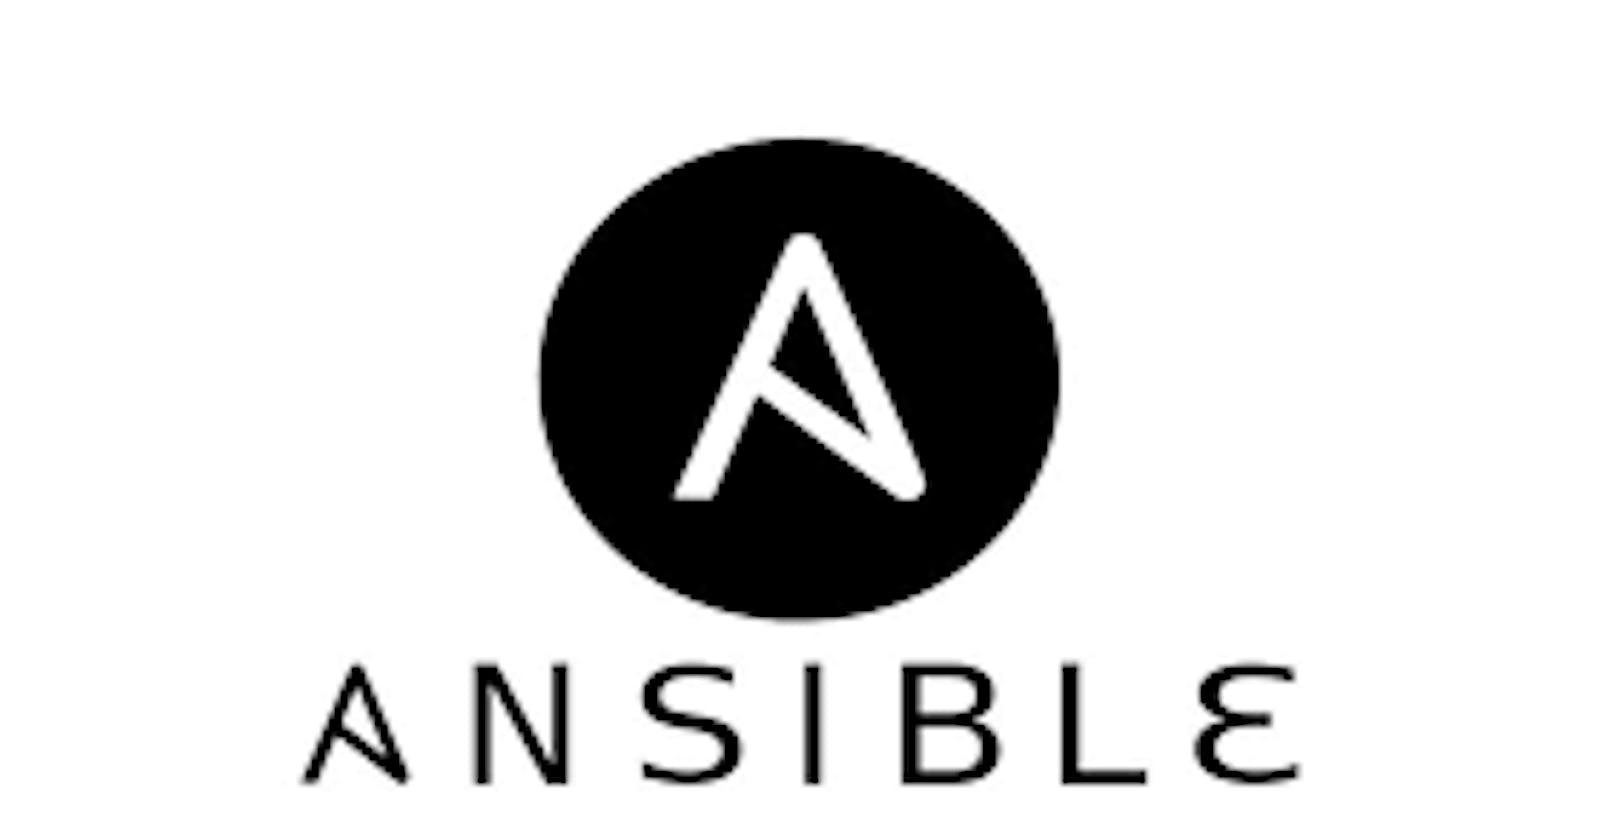 Day 57: Ansible Hands-on with video